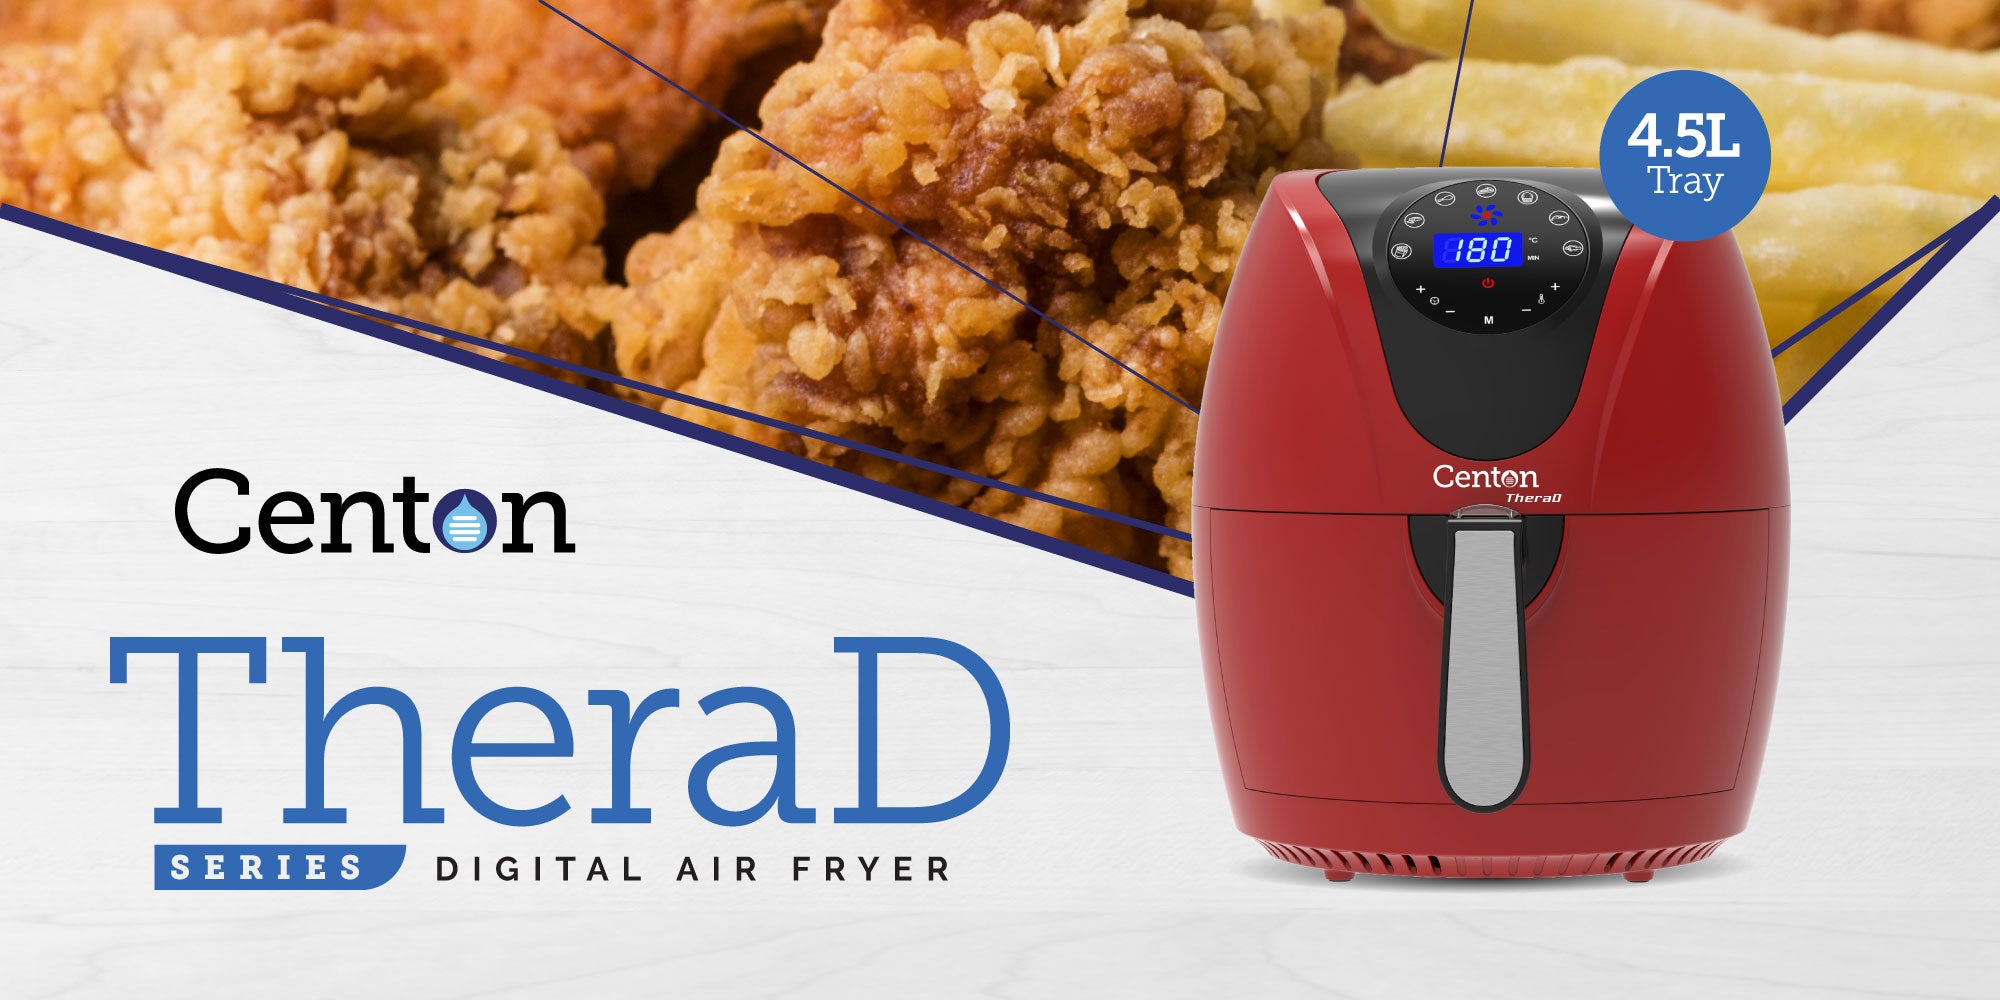 Centon TheraD Digital Air Fryer with Smart Digital Touchscreen Control